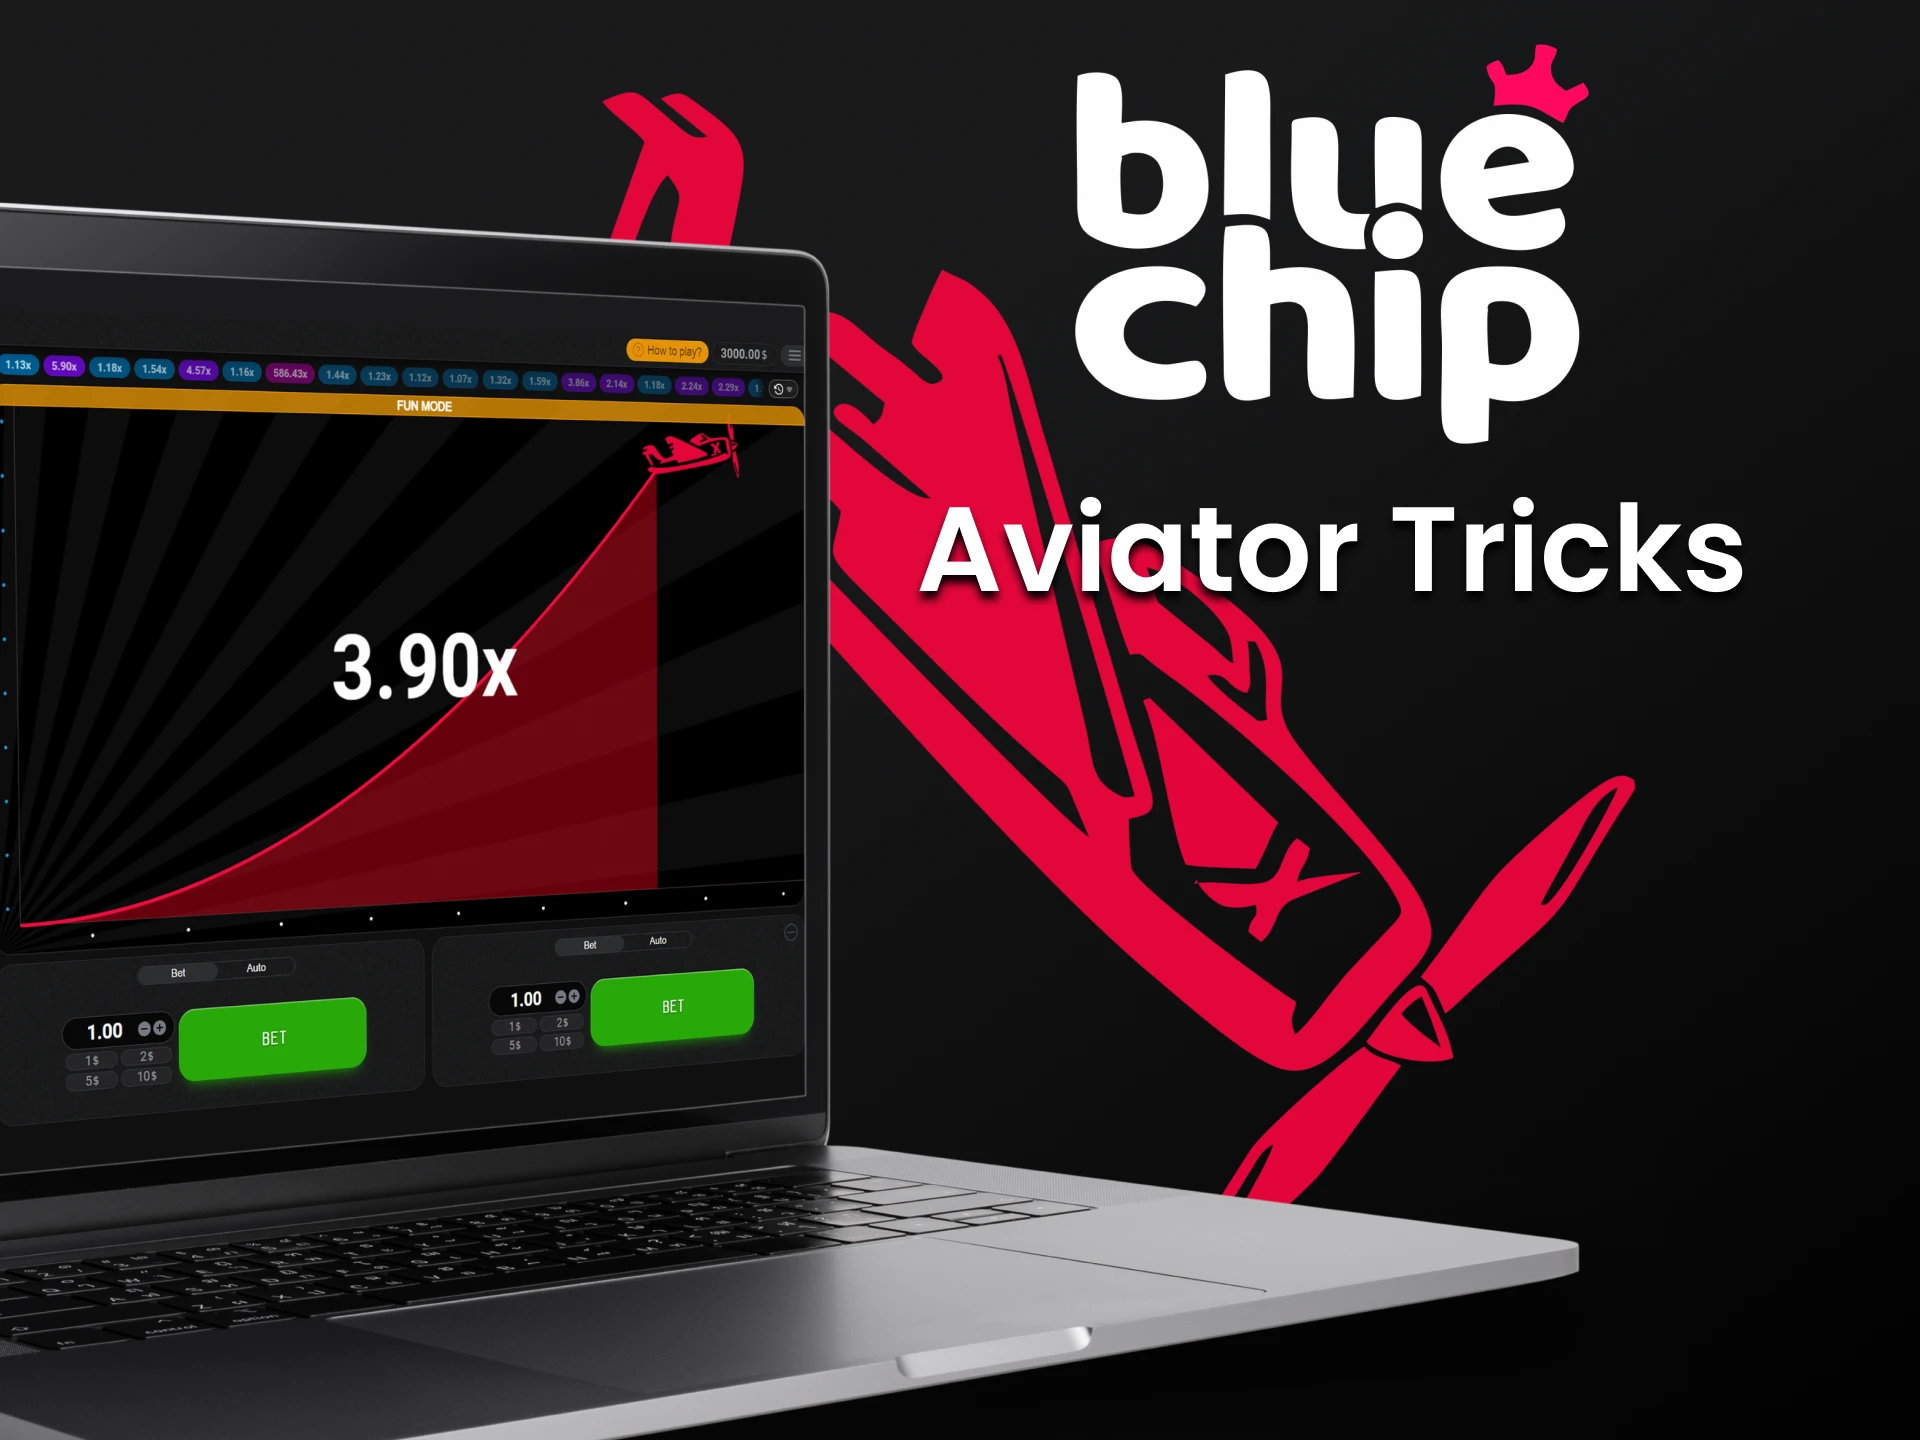 Learn all the options and skills to win in BlueChip's Aviator game.